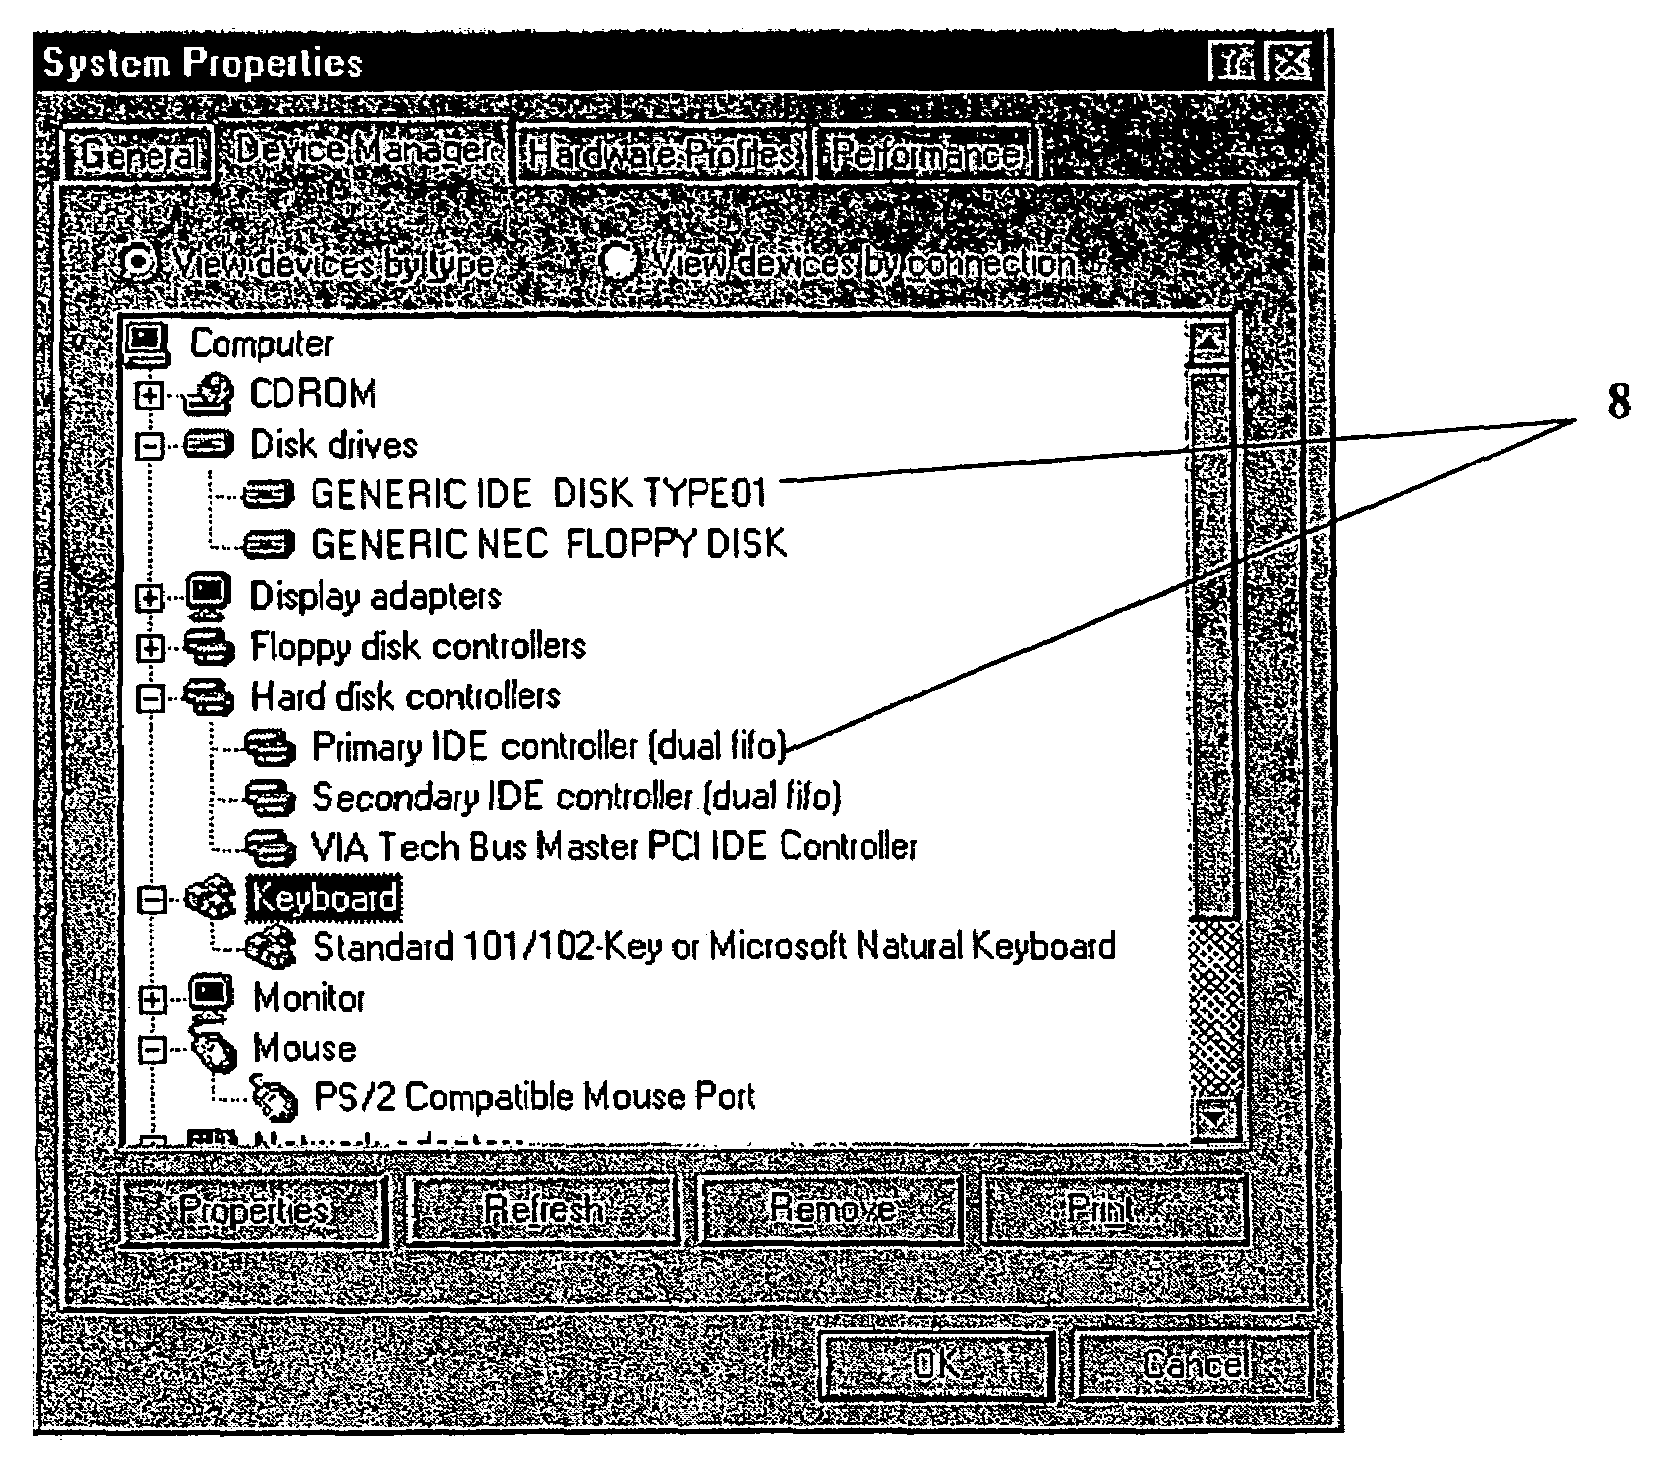 Graphical representation of system information on a remote computer